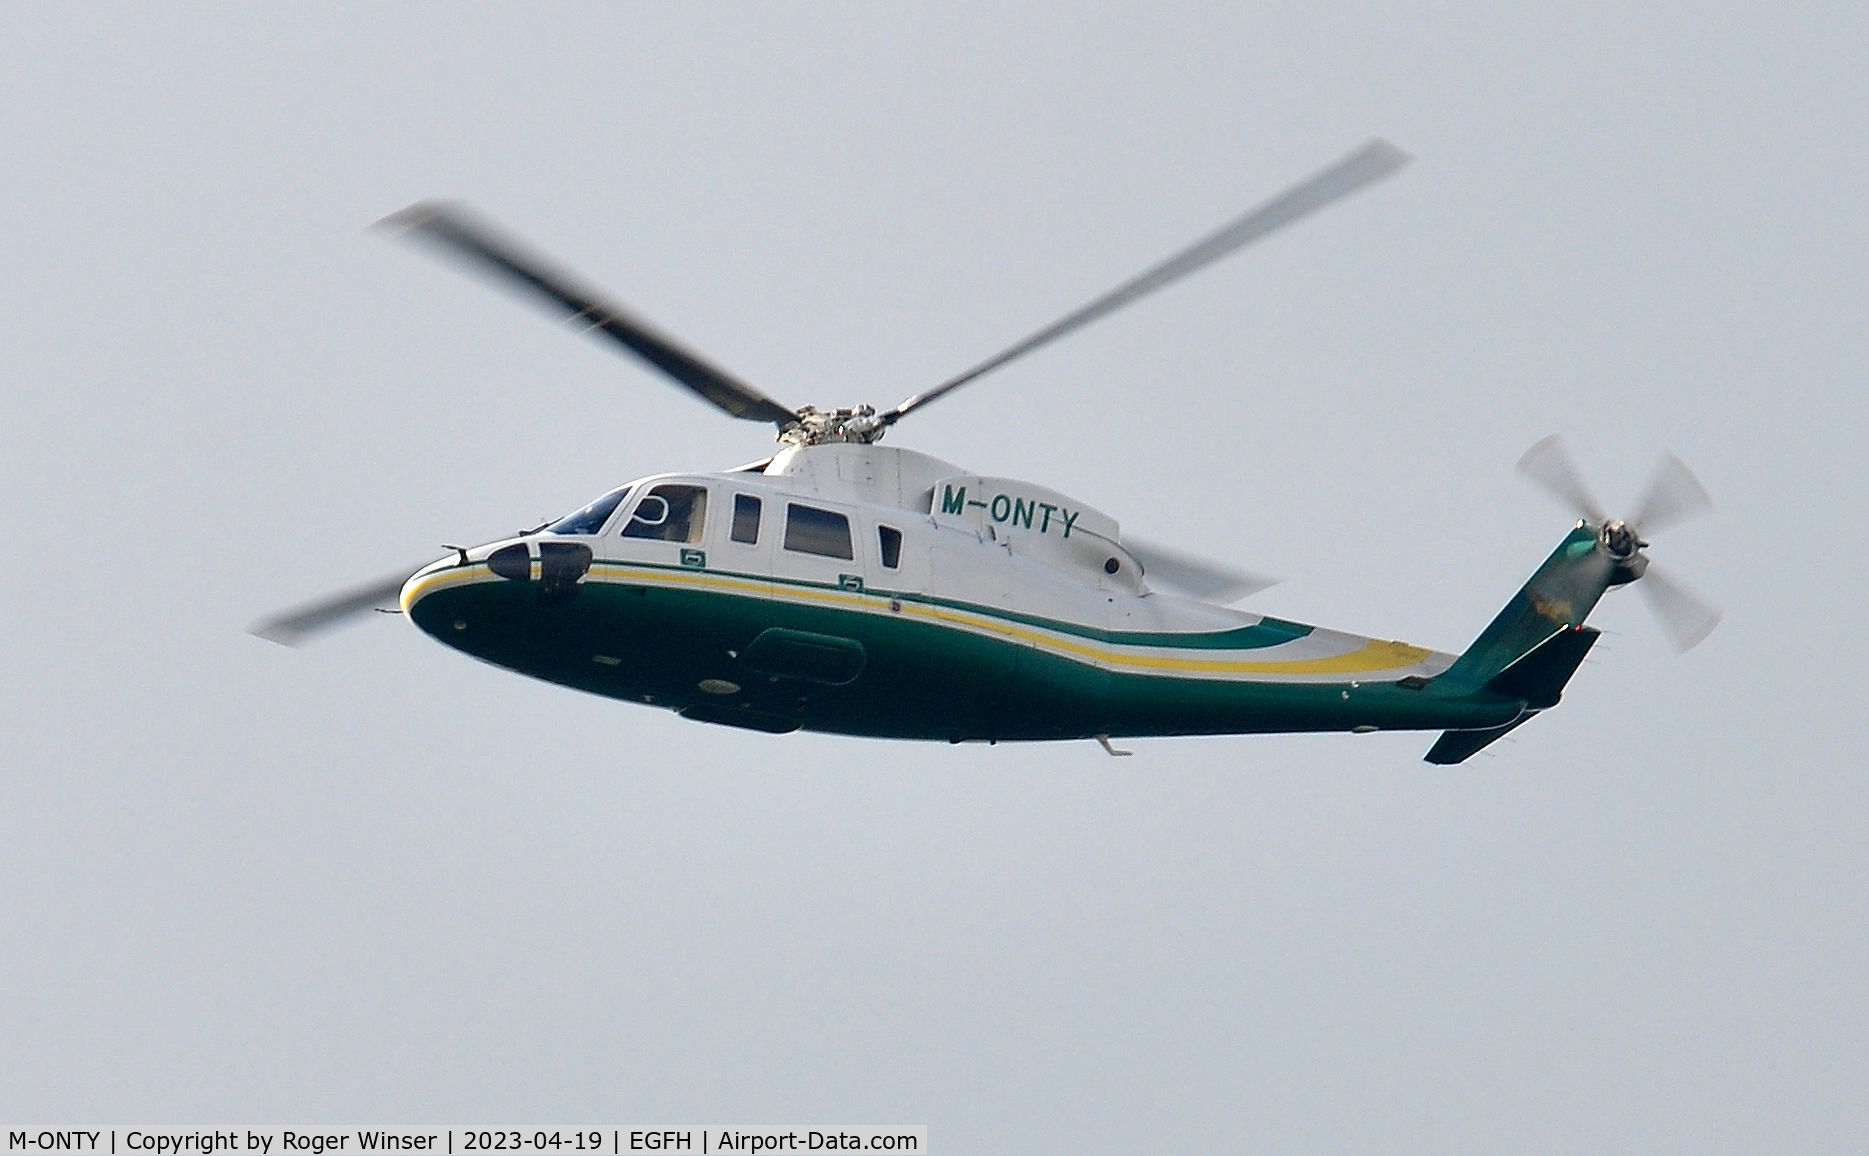 M-ONTY, 2007 Sikorsky S-76C C/N 760696, Helicopter approaching Runway 22.